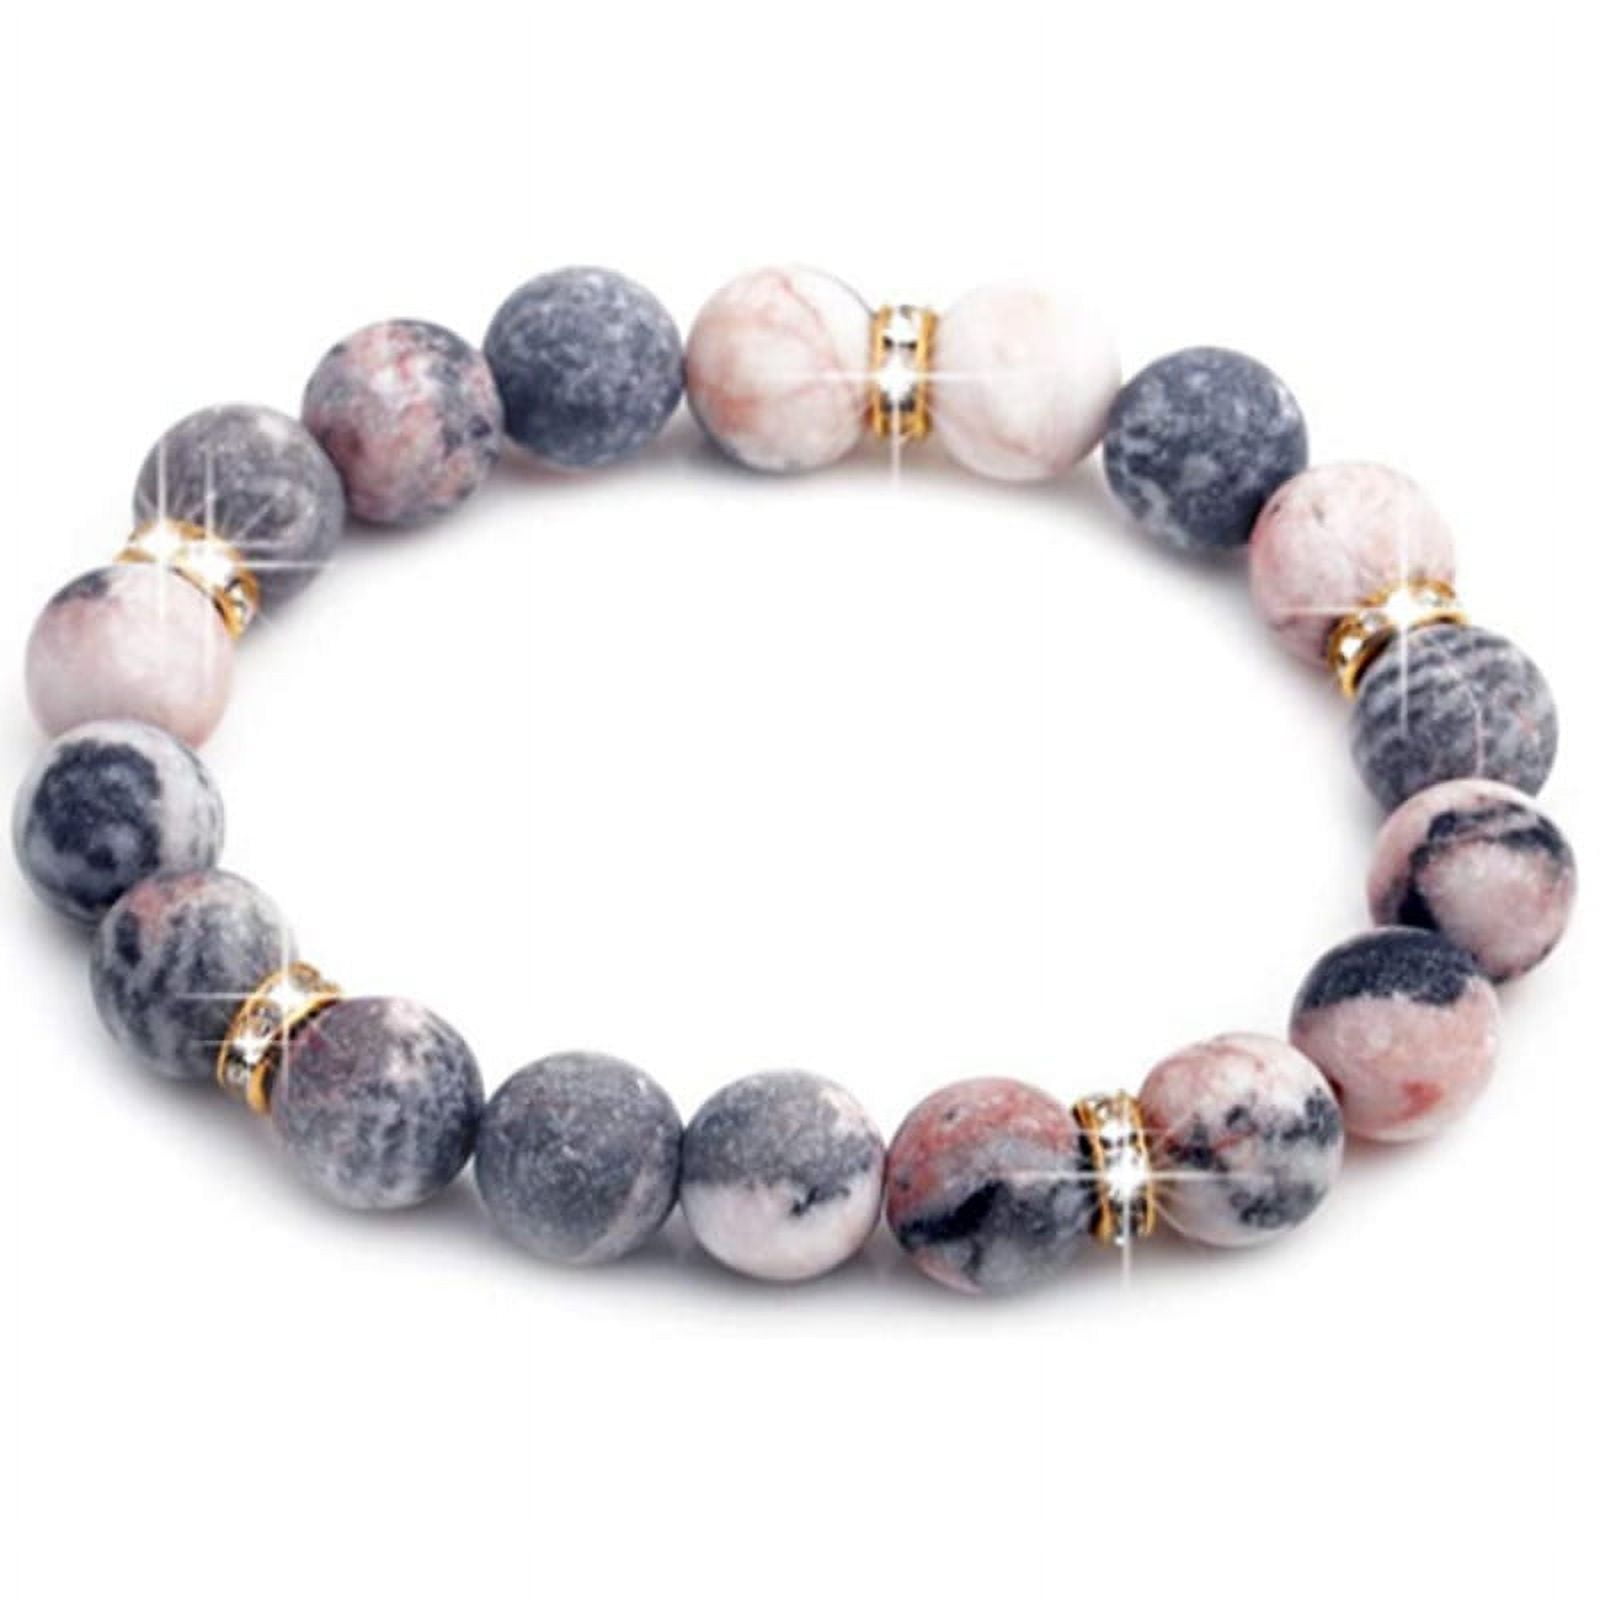 Cast of Stones - Calming & Anti-Anxiety Bracelet – harley lilac